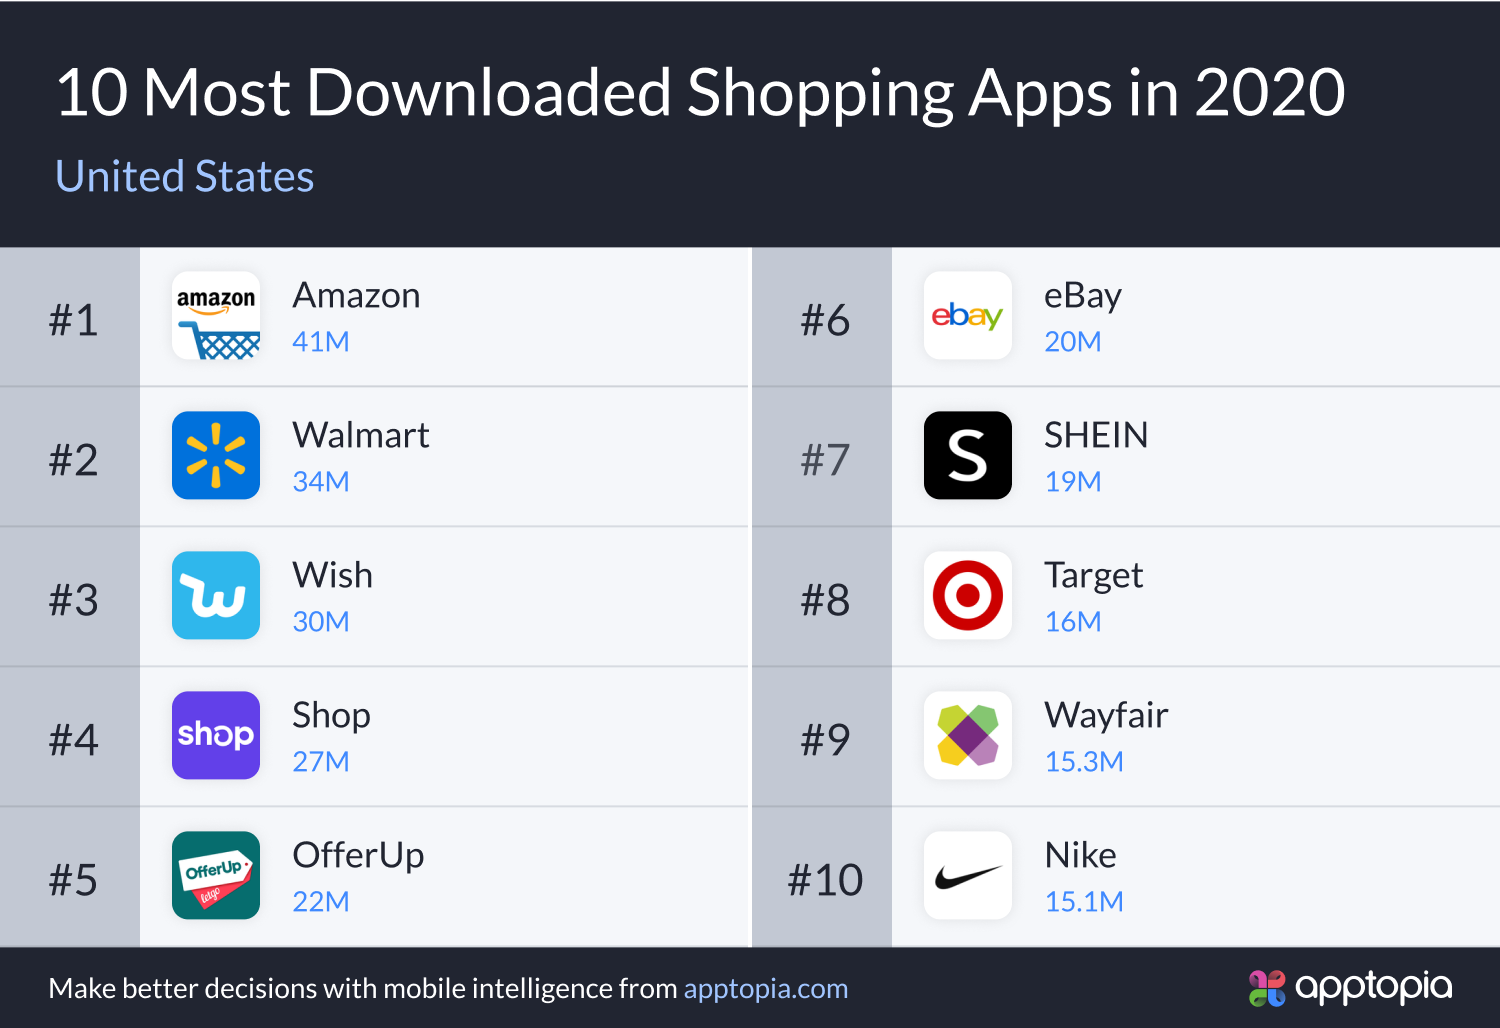 Shopee surpasses Amazon and ranks first on the global app download list